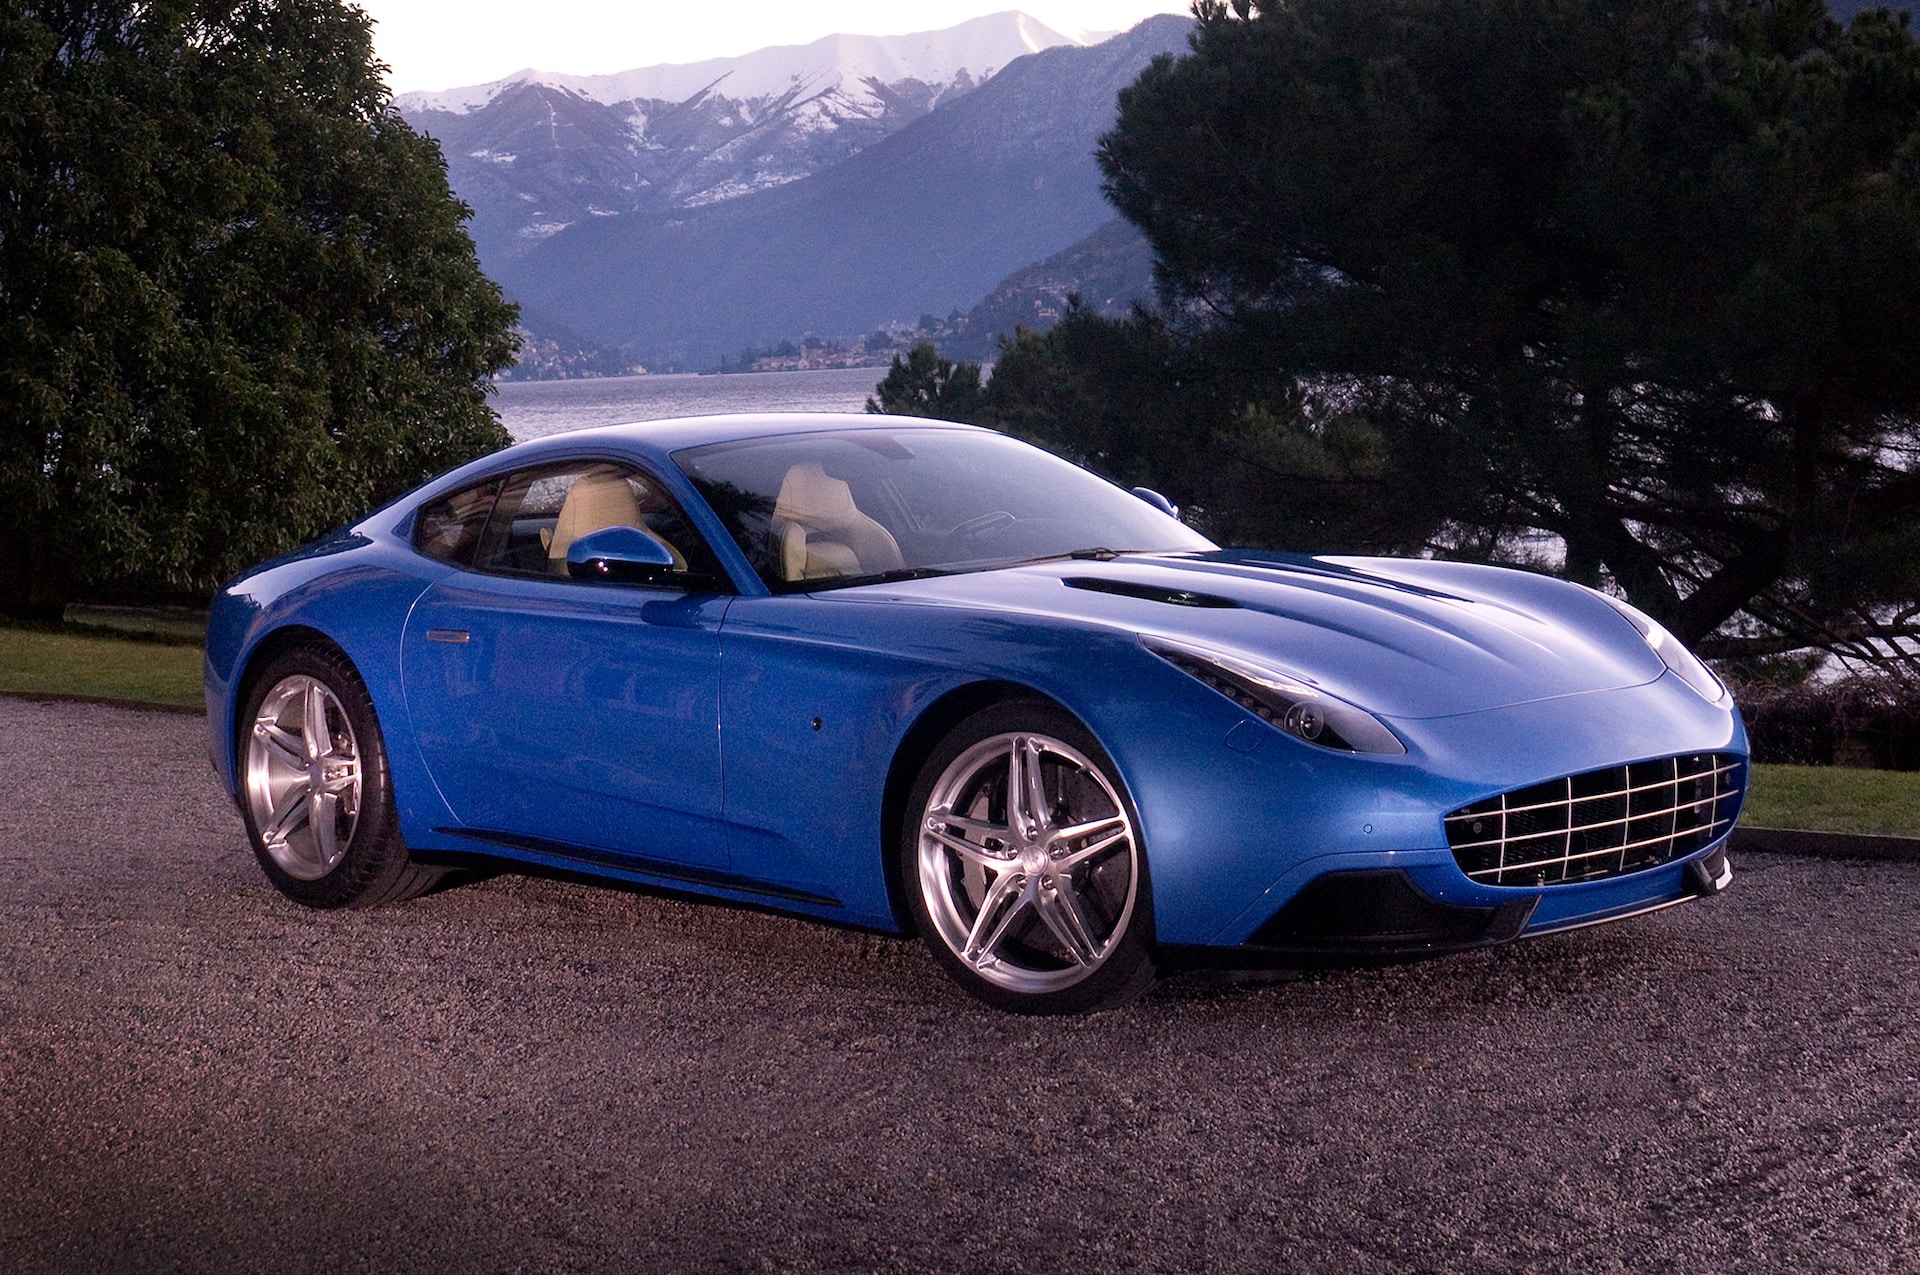 Touring Berlinetta Lusso Wallpapers